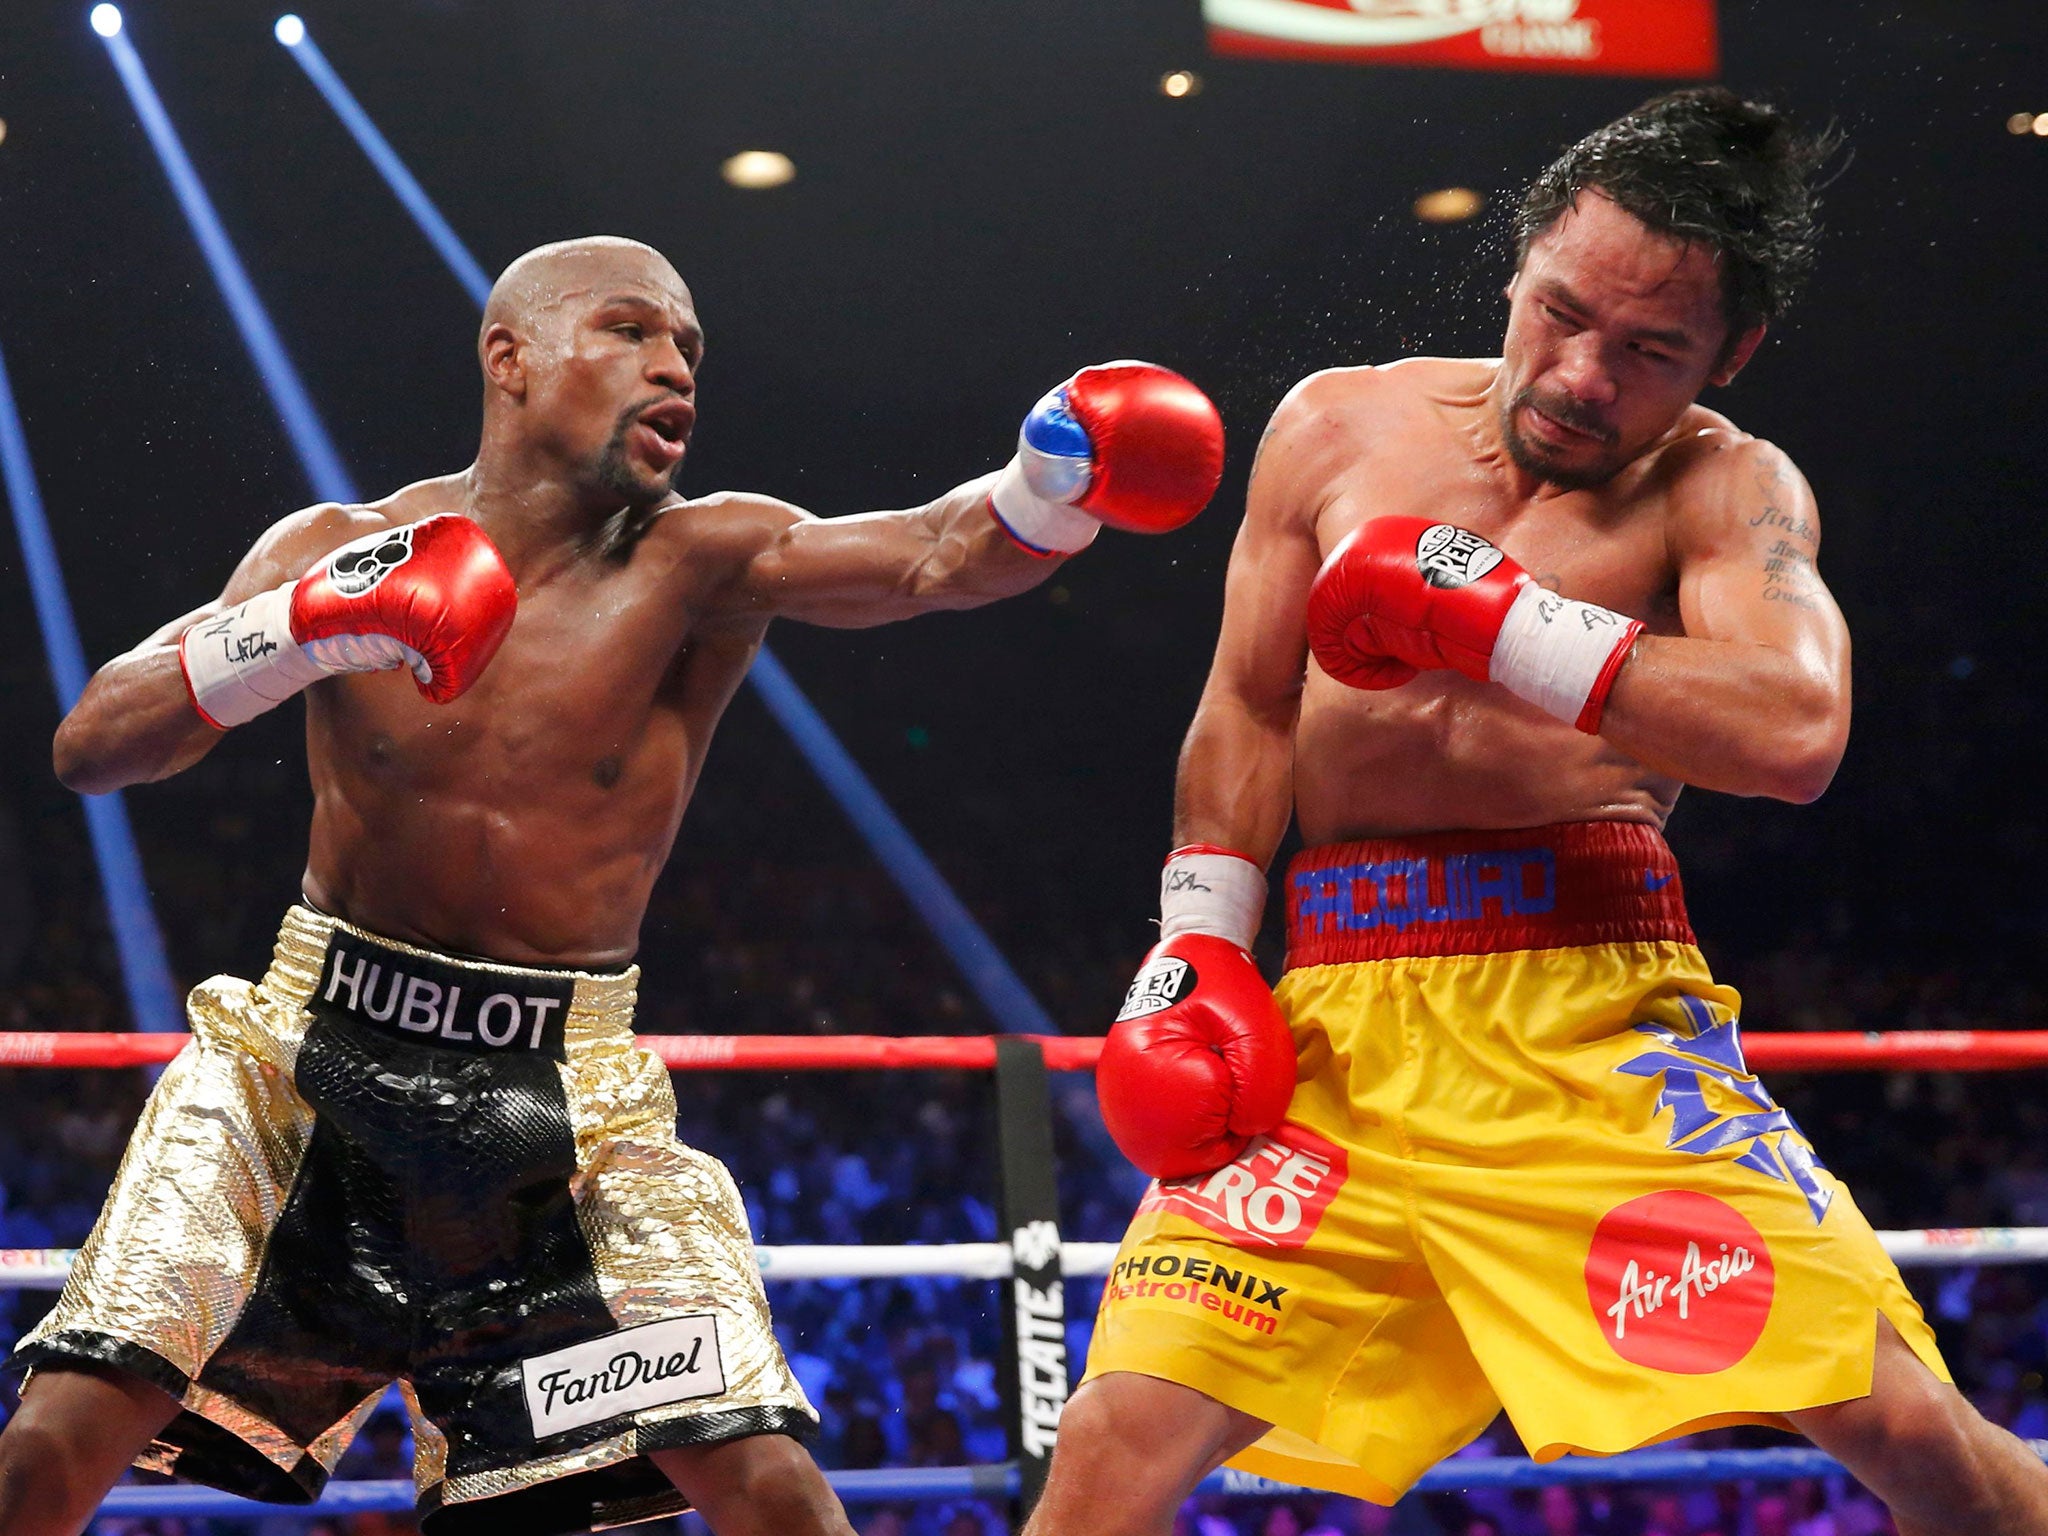 Floyd Mayweather, Jr. of the U.S. lands a left to the face of Manny Pacquiao of the Philippines (R) in the 11th round during their welterweight WBO, WBC and WBA (Super) title fight in Las Vegas, Nevada